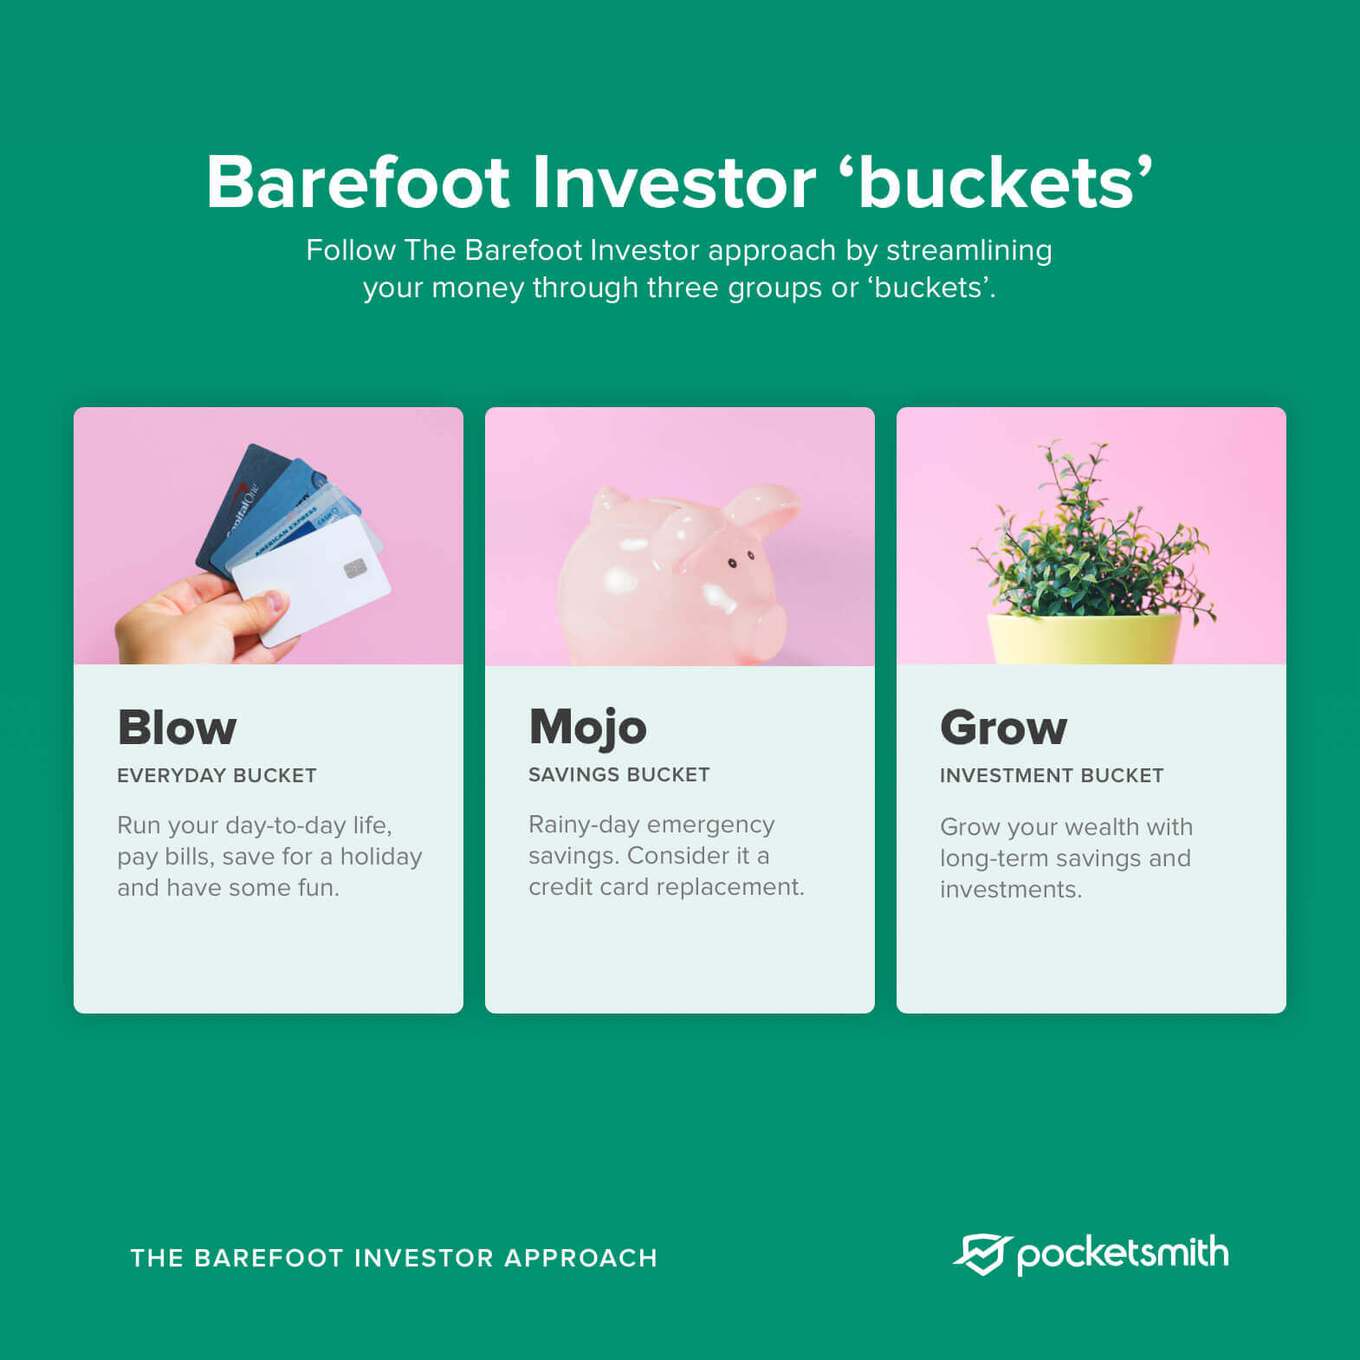 A diagram showing the breakdown of Barefoot Investor buckets - Blow, Mojo and Grow